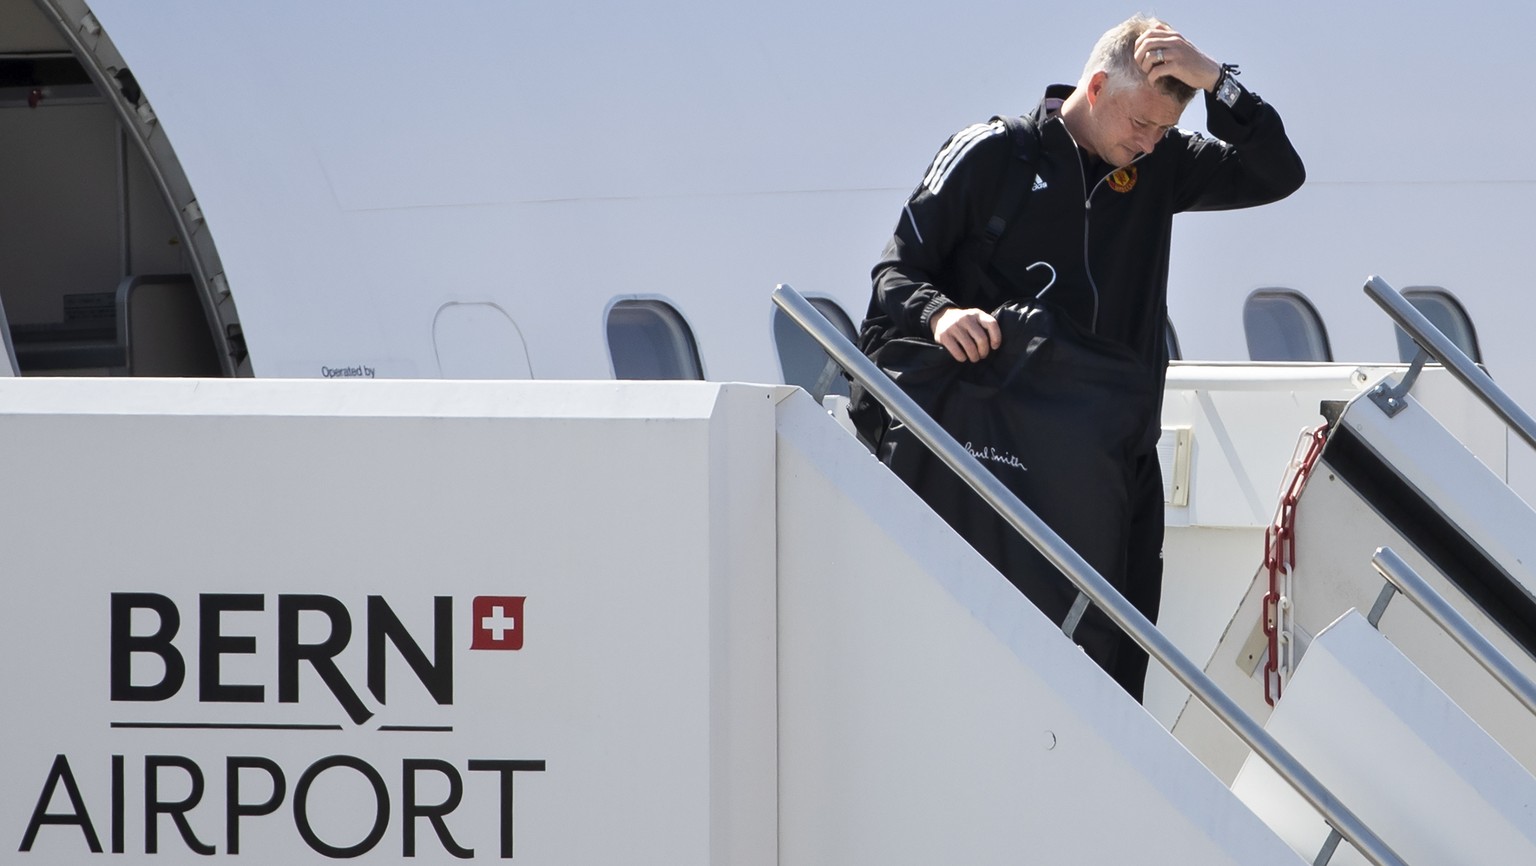 Manchester United&#039;s head coach Ole Gunnar Solskjaer disembarks from the plane upon his team&#039;s arrival at the airport in Bern-Belp, Switzerland, 13 September 2021. Manchester United will face ...